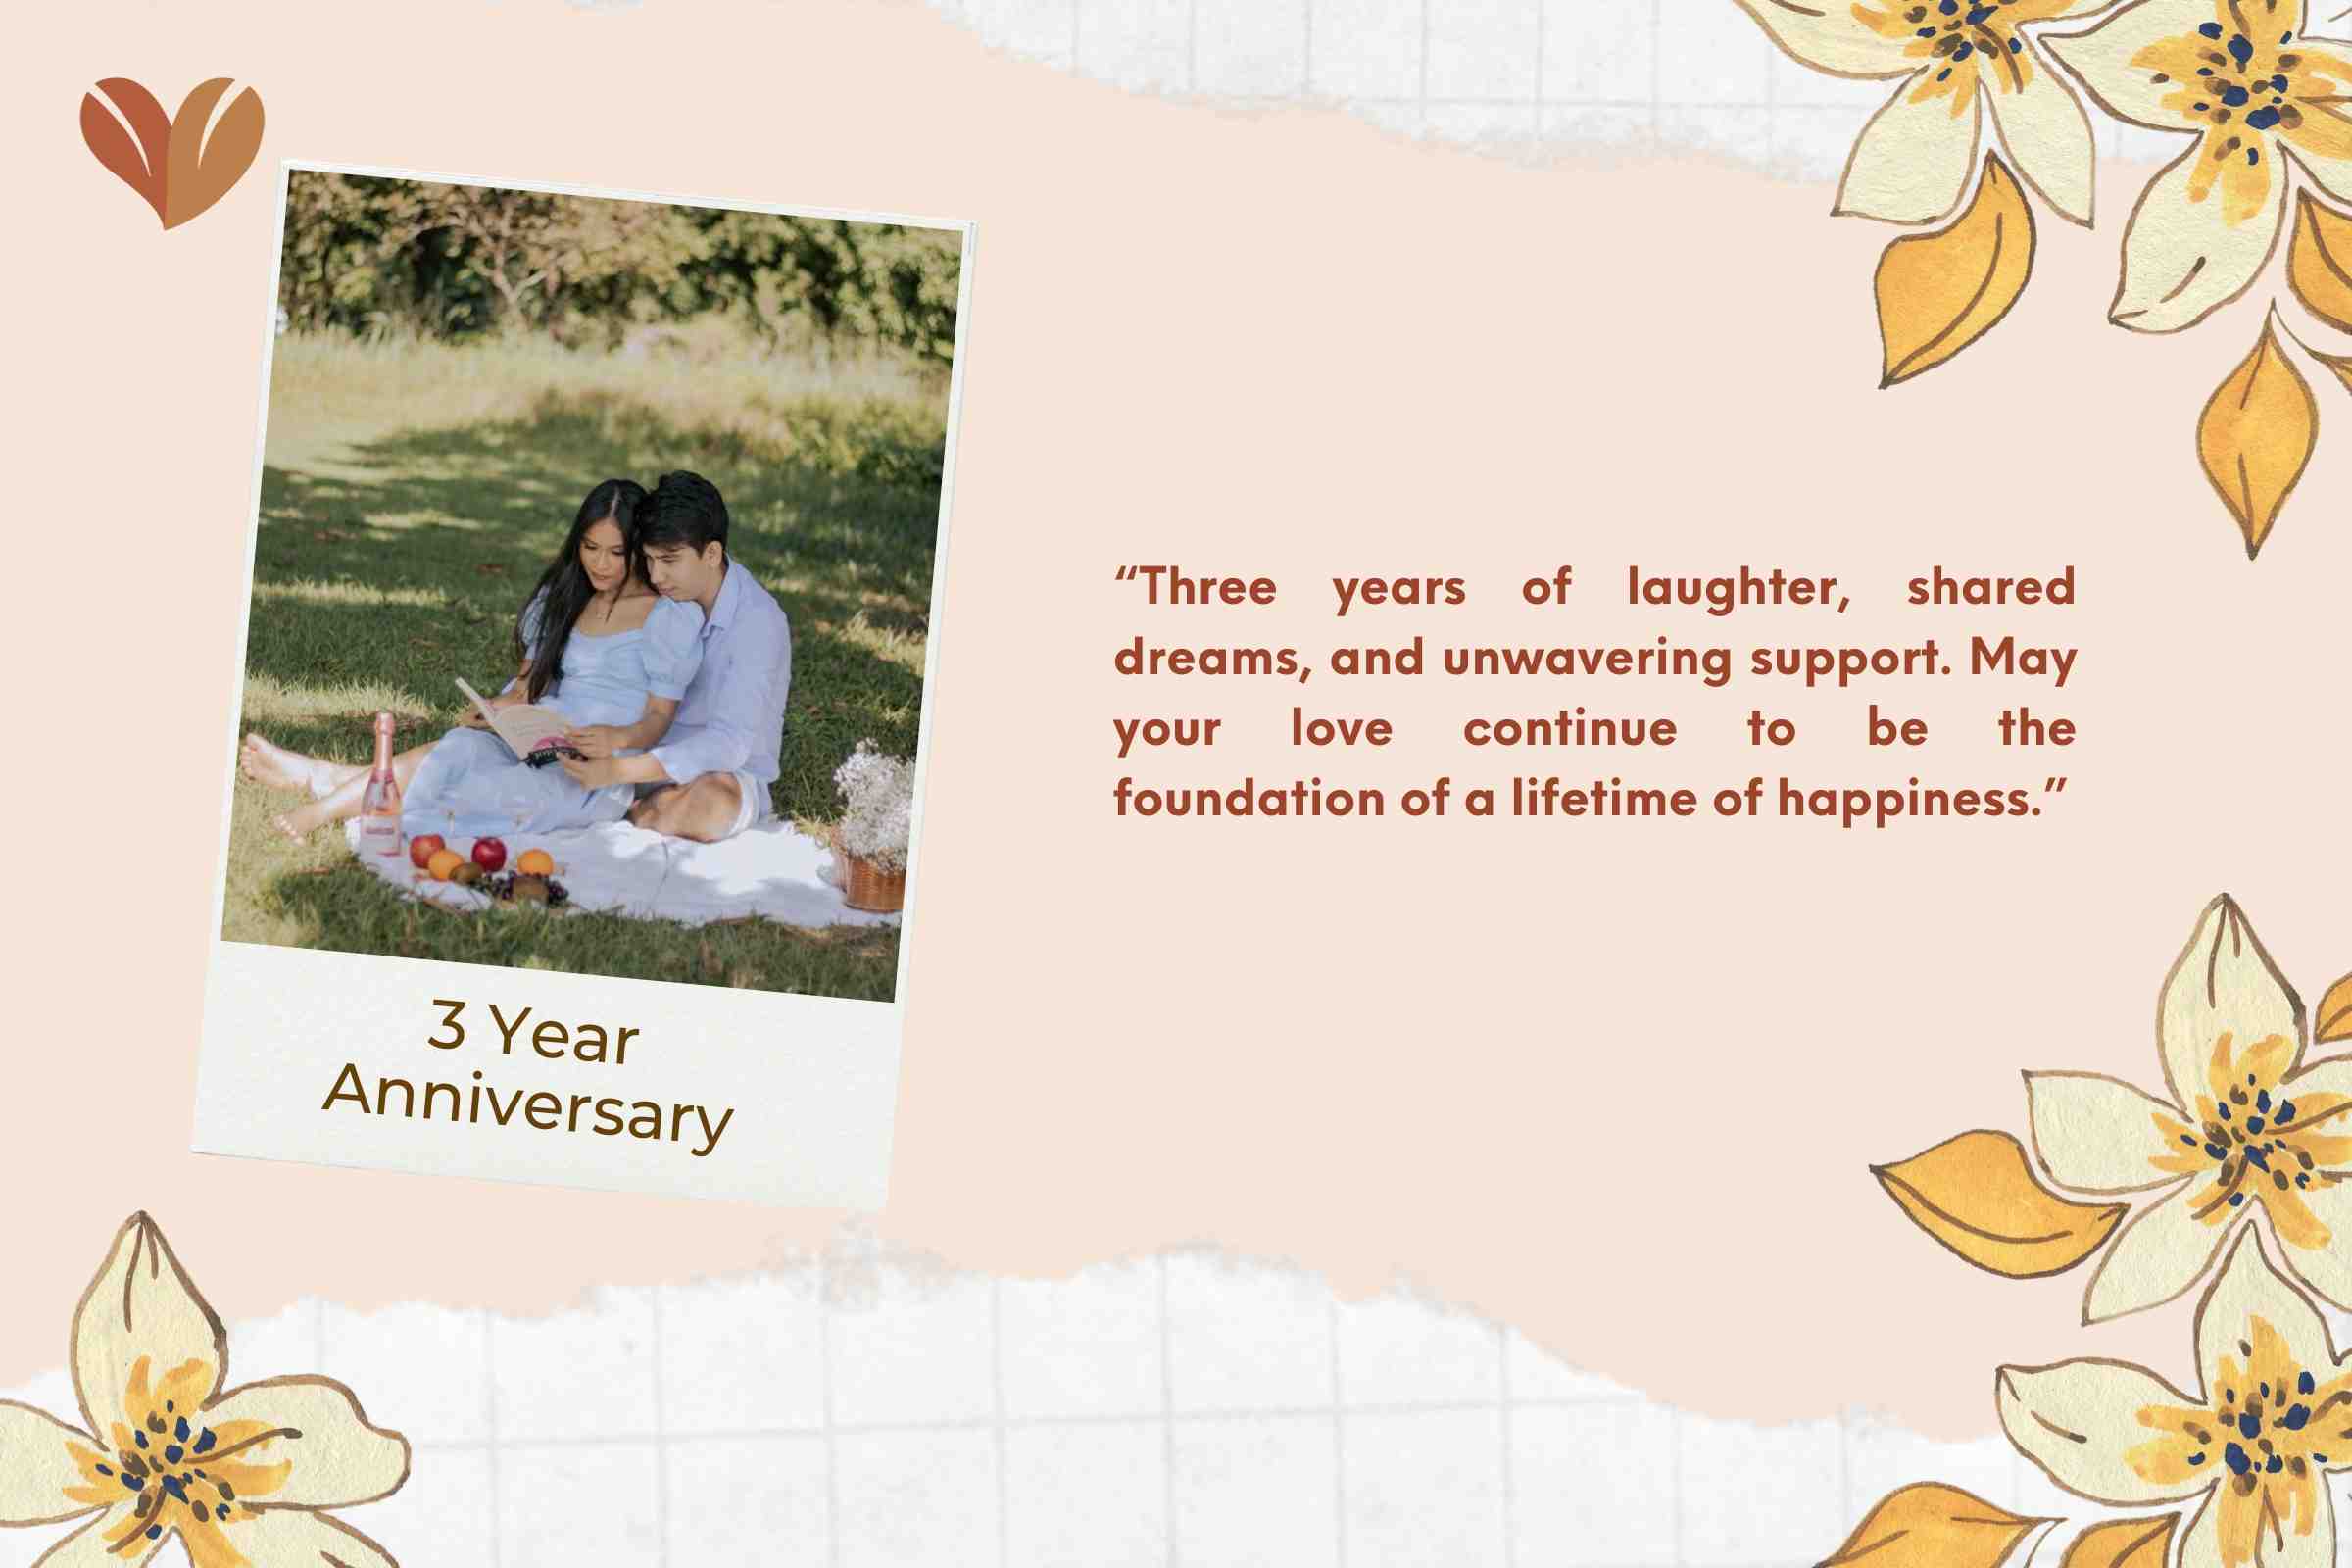 3 Year Anniversary Messages for Couples